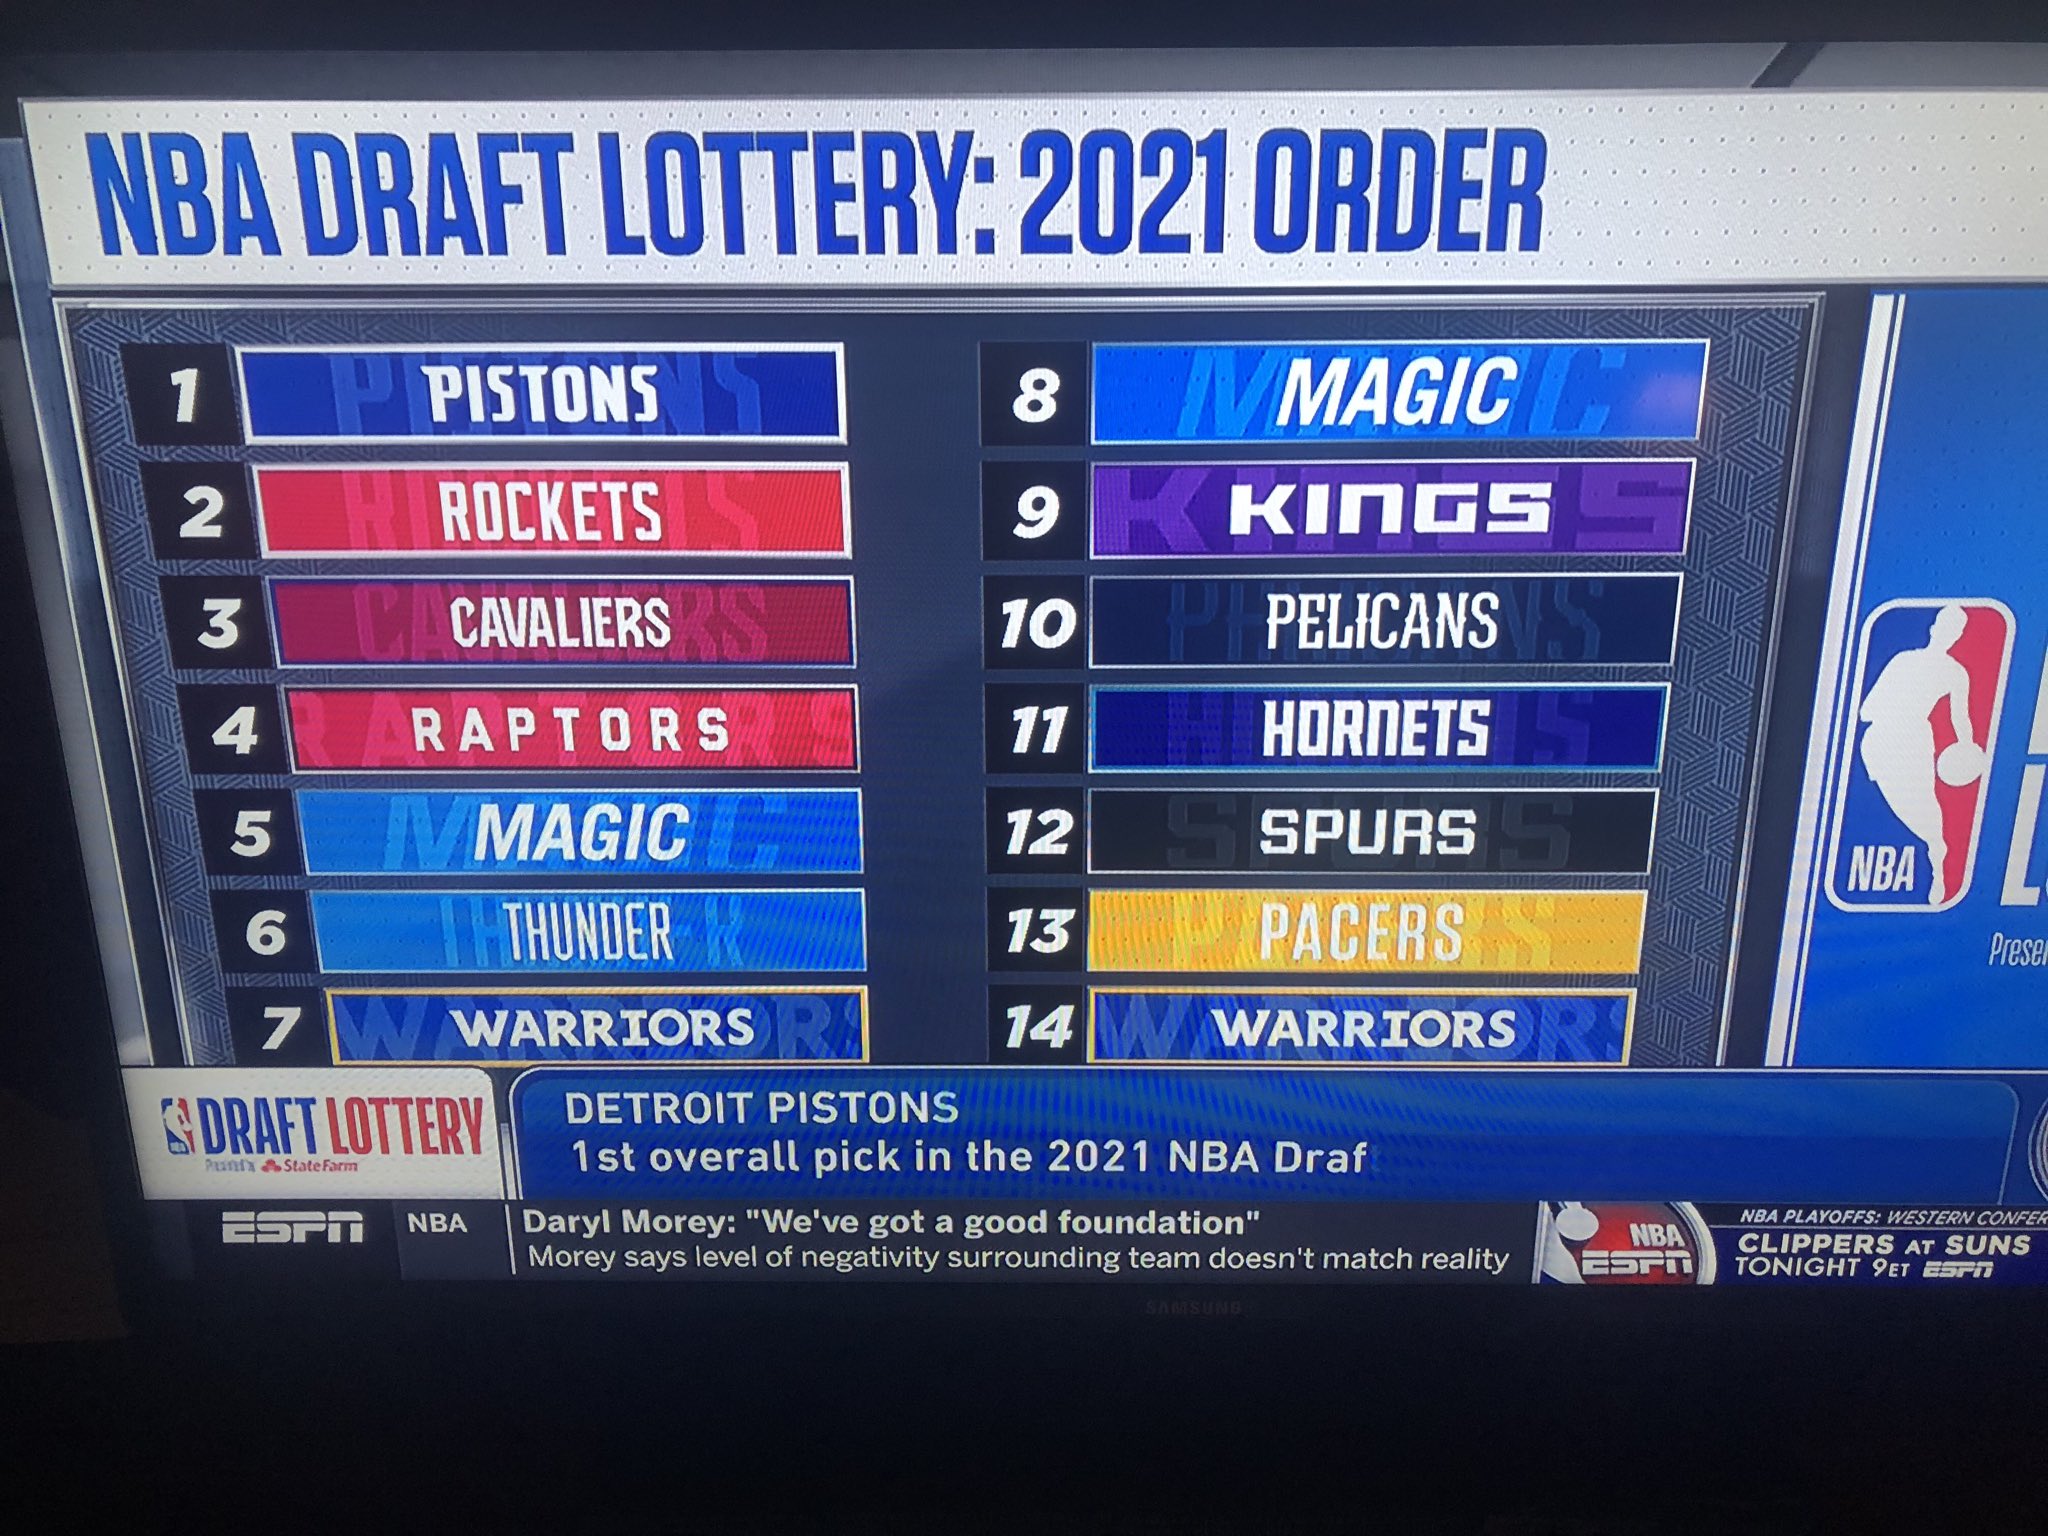 Adam Zagoria Auf Twitter Here S The Nba Draft Order The Warriors Pick At 7 And 14